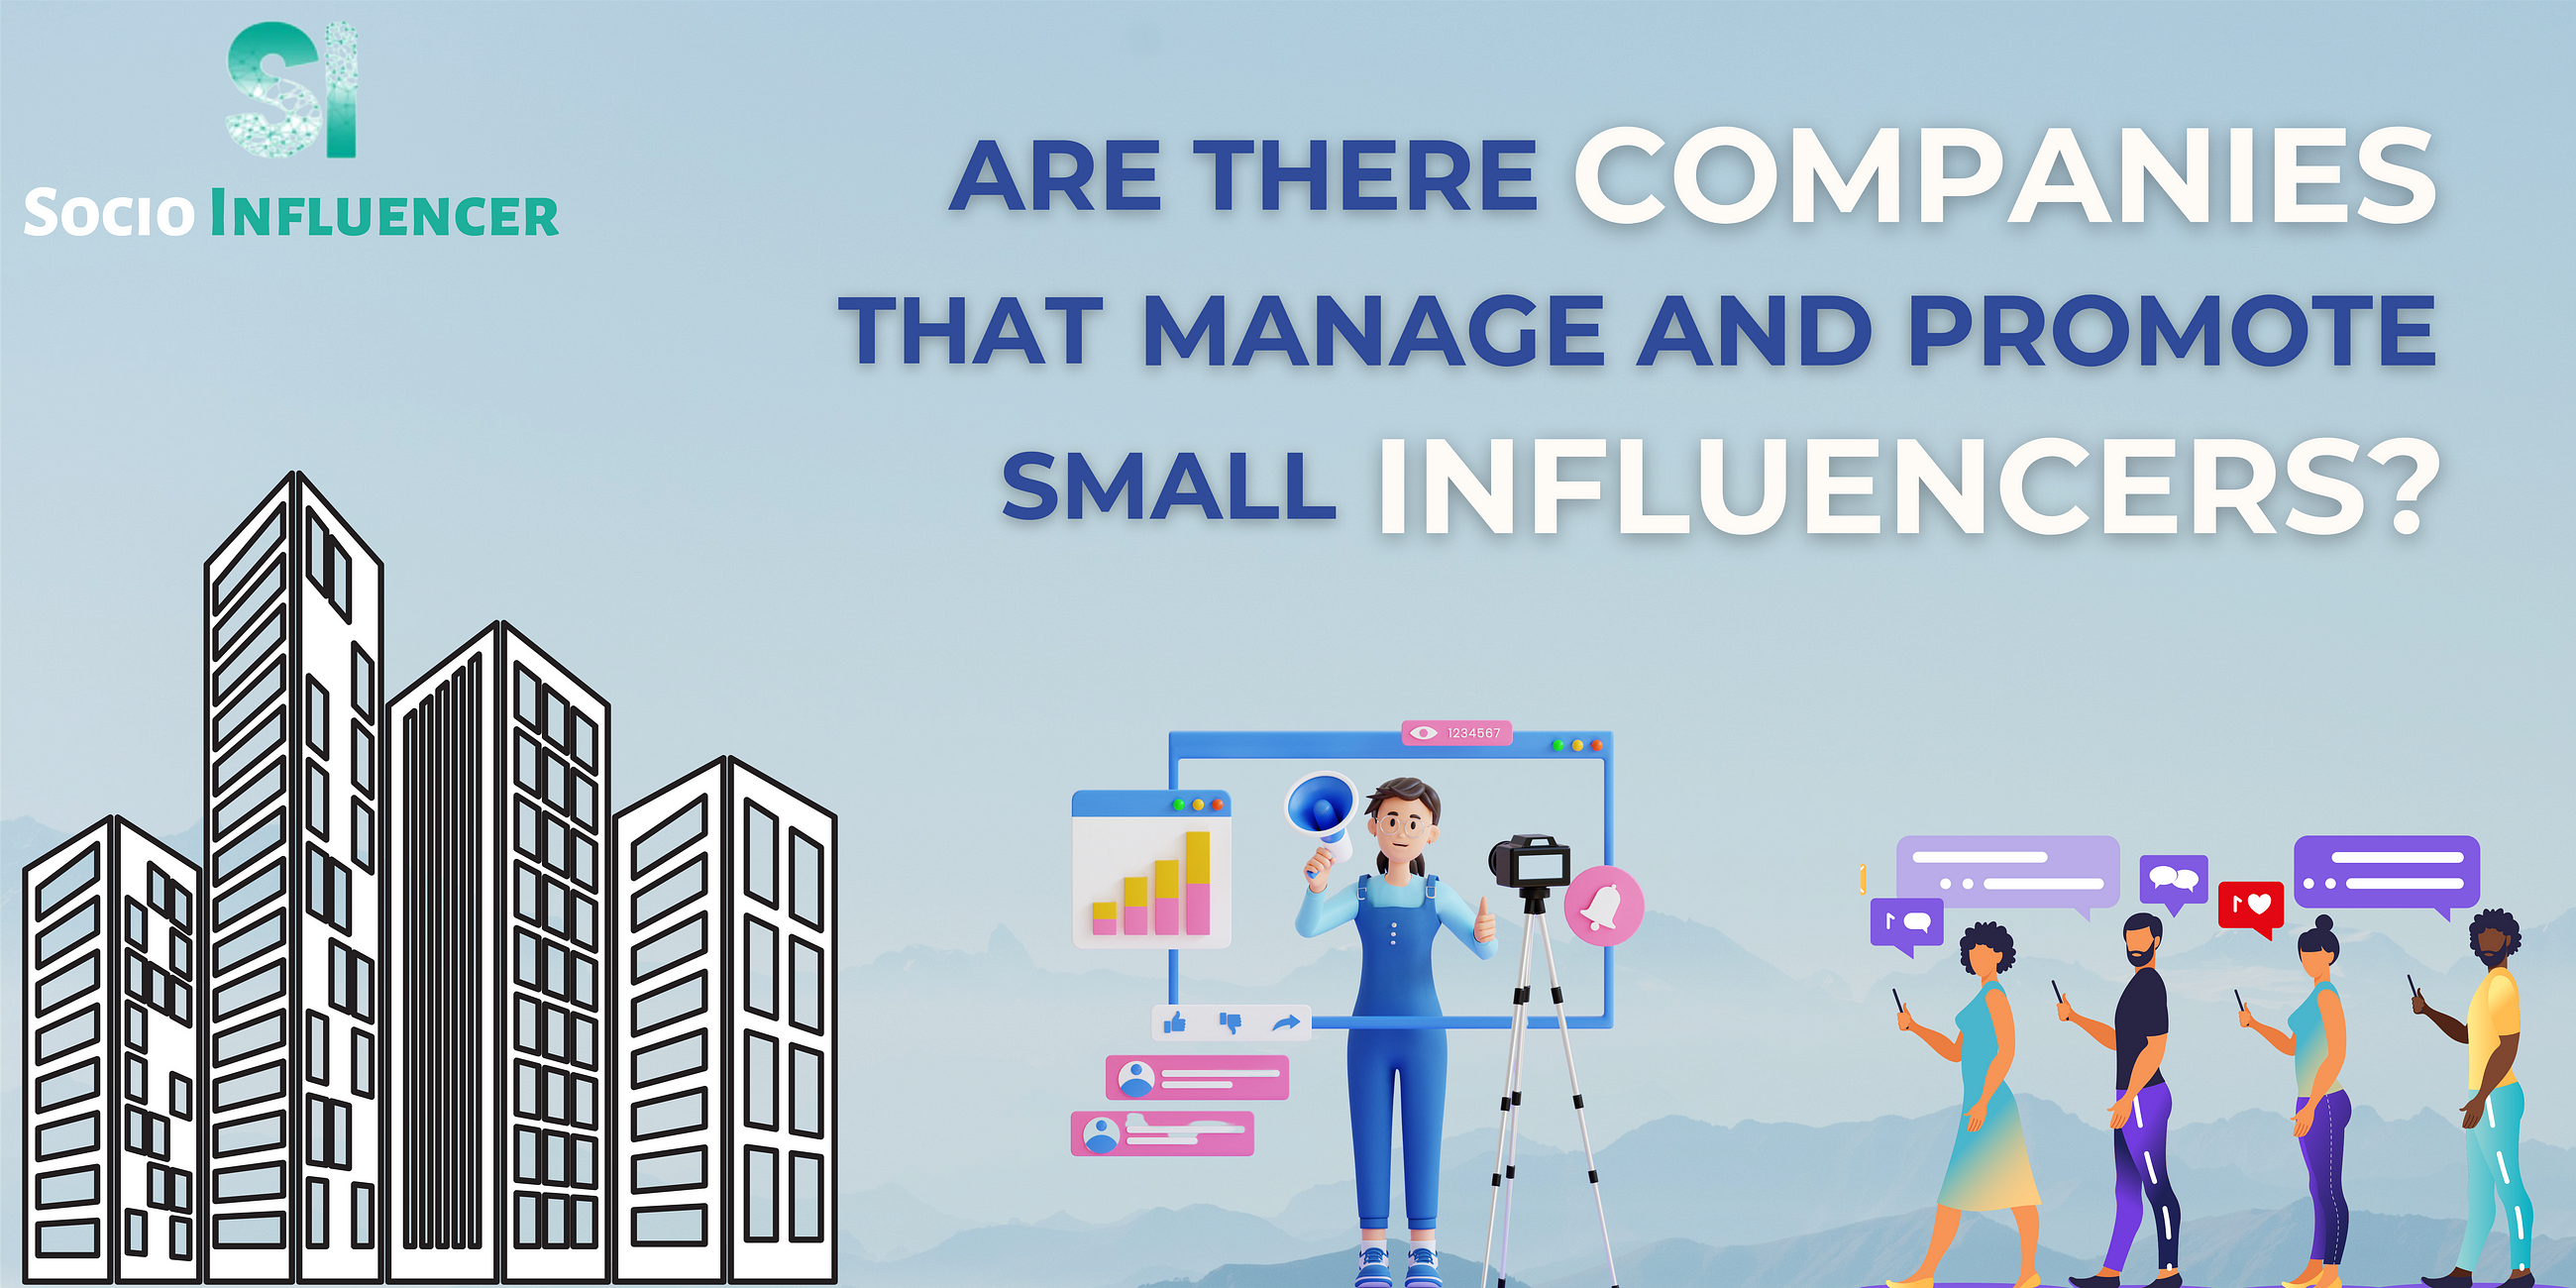 Are There Companies That Manage and Promote Small Influencers?